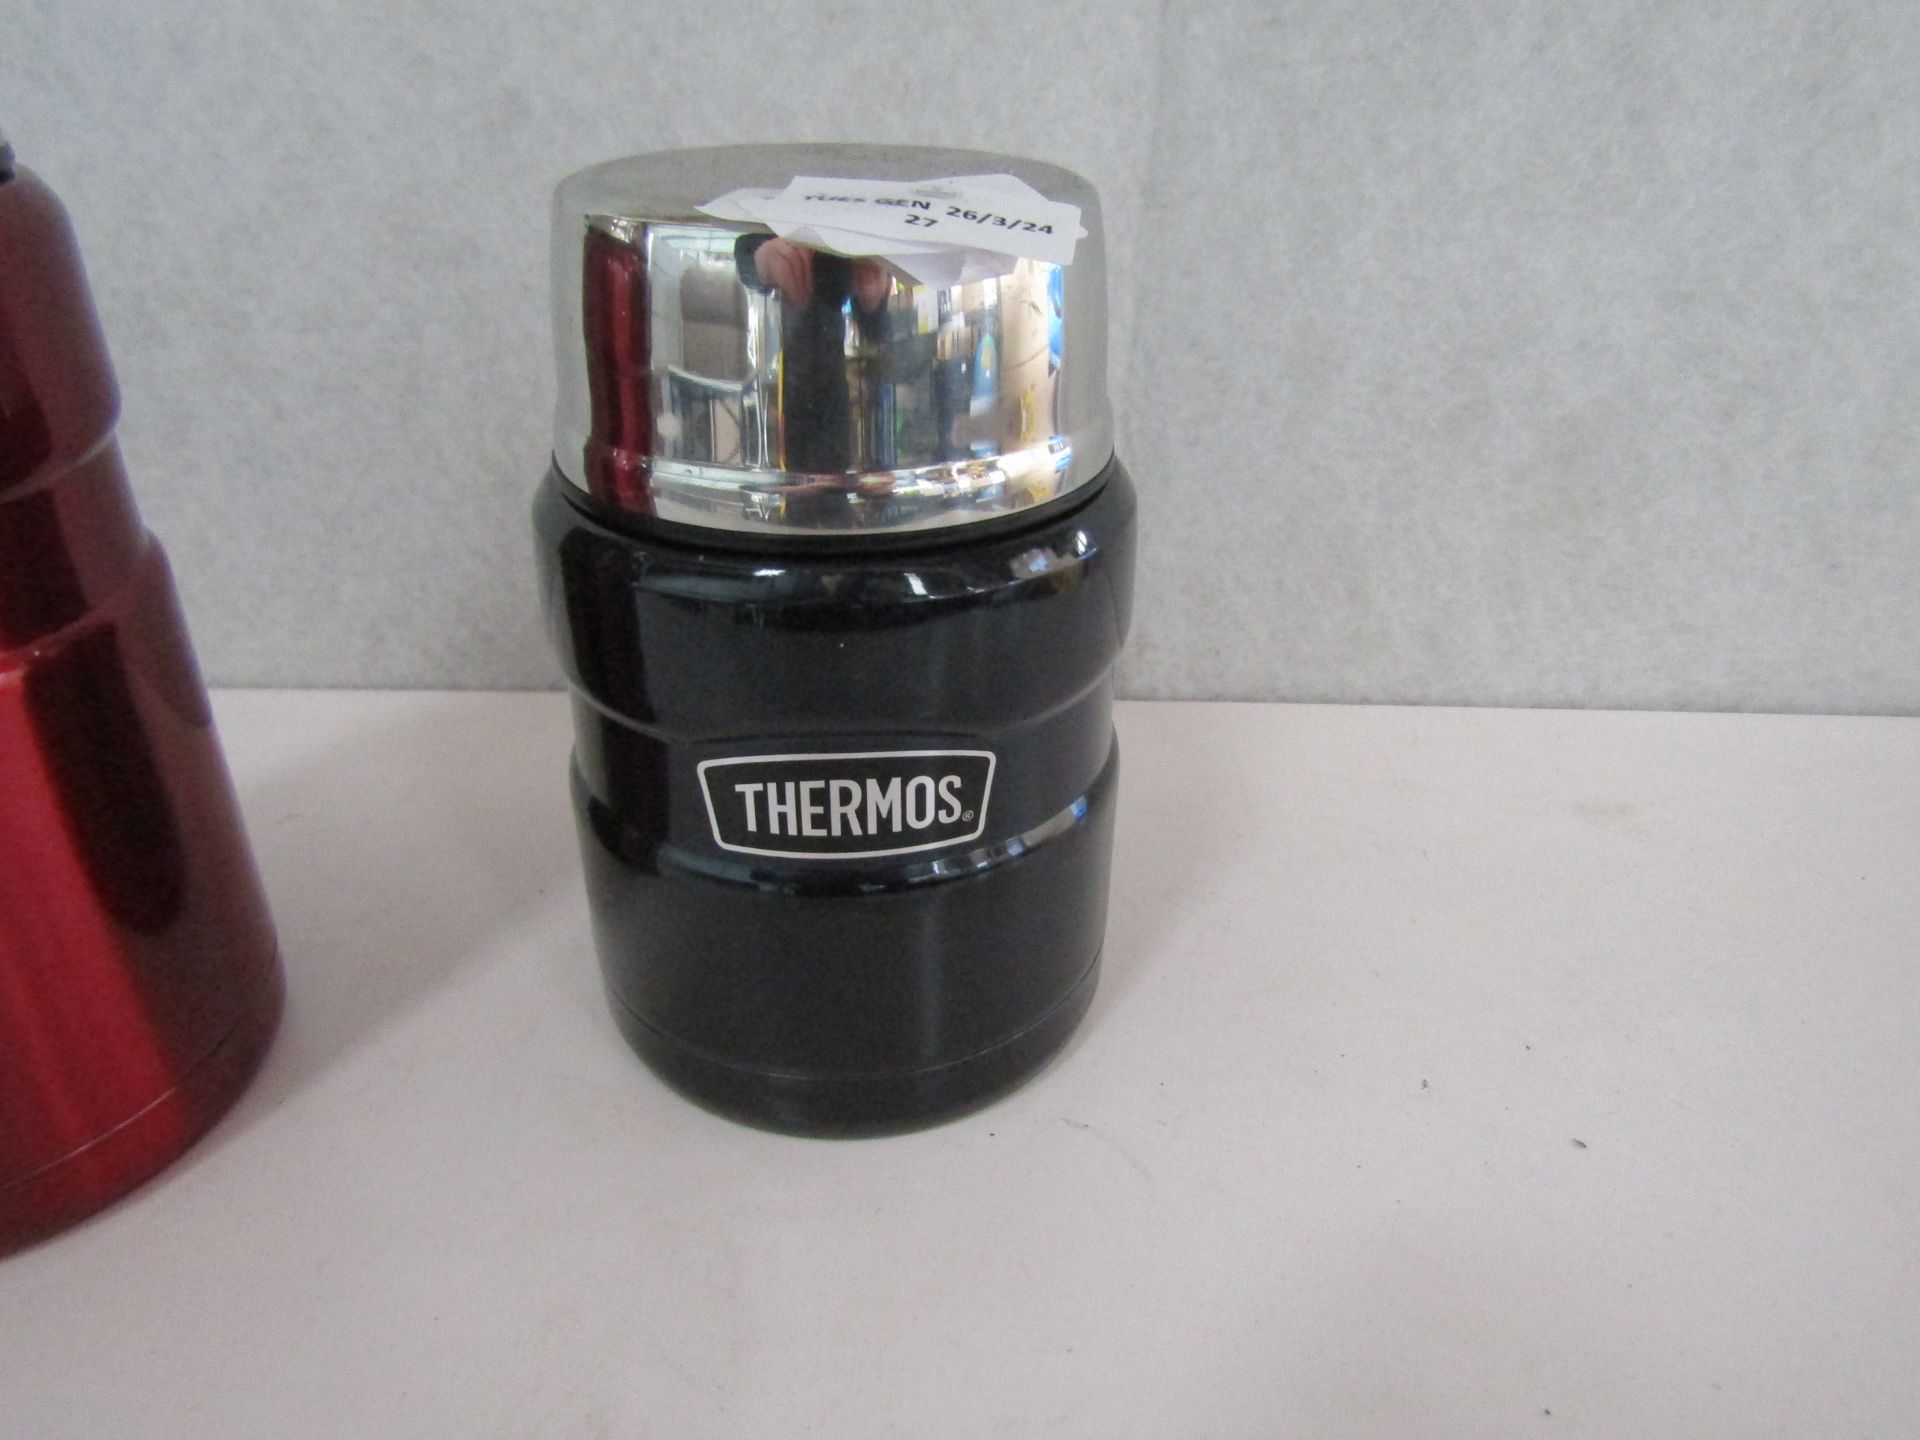 Thermos - Stainless Steel Black Insulated Food Pot - Good Condition.